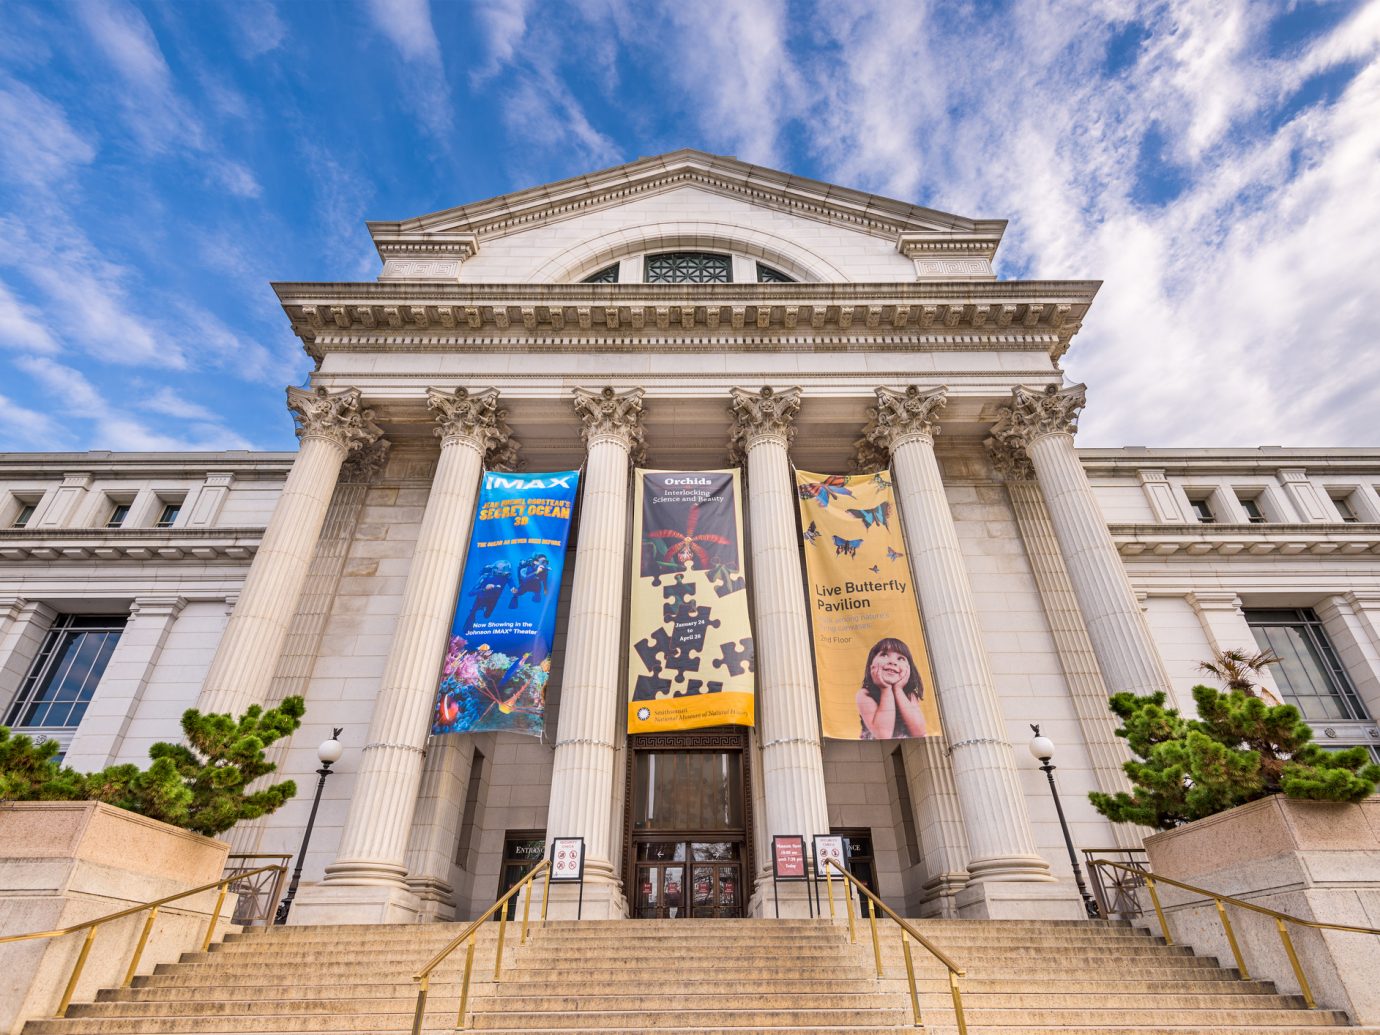 Washington DC, USA - April 12, 2015: Banners hang at the entrance to the National Museum of Natural History in DC. It is considered the second most visited museum in the world.